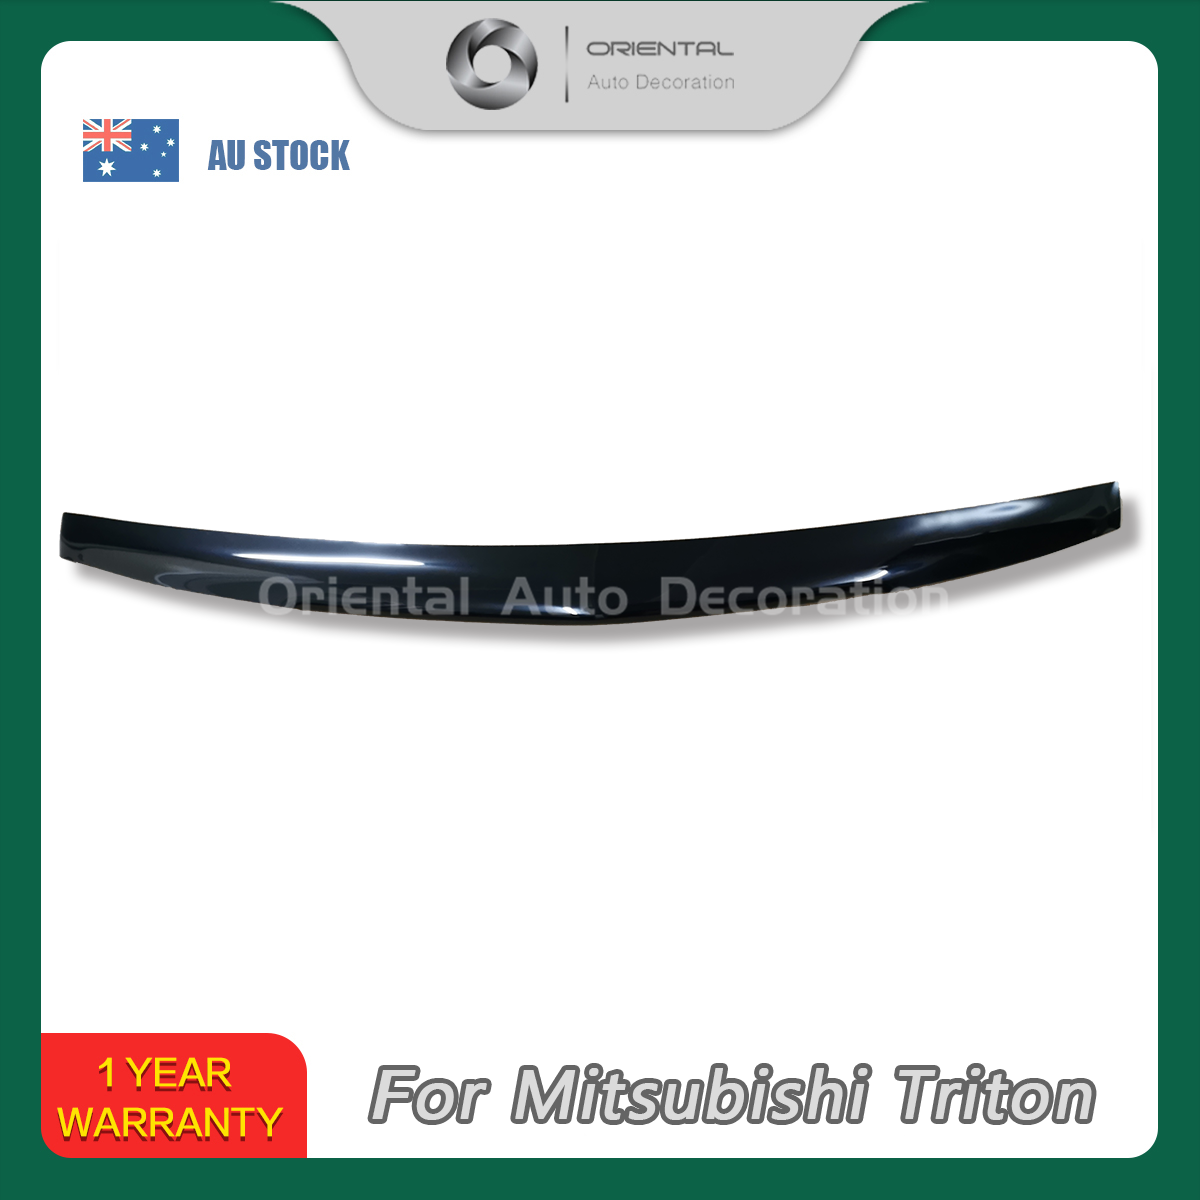 PICK UP ONLY!!! Bonnet Protector for Mitsubishi Triton ML MN series 06-15 model #BC